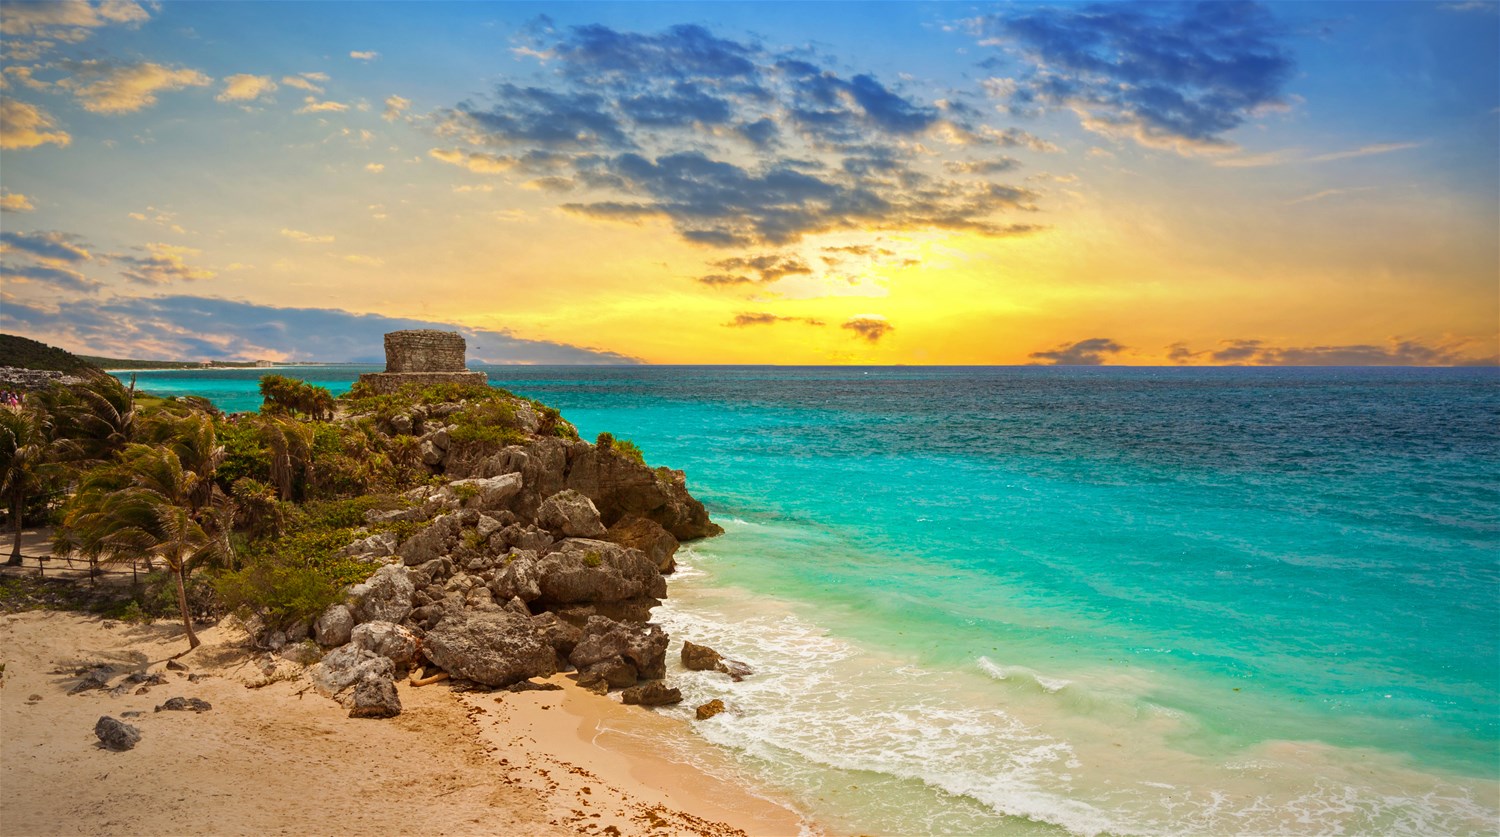 The Best Time to Visit Mexico